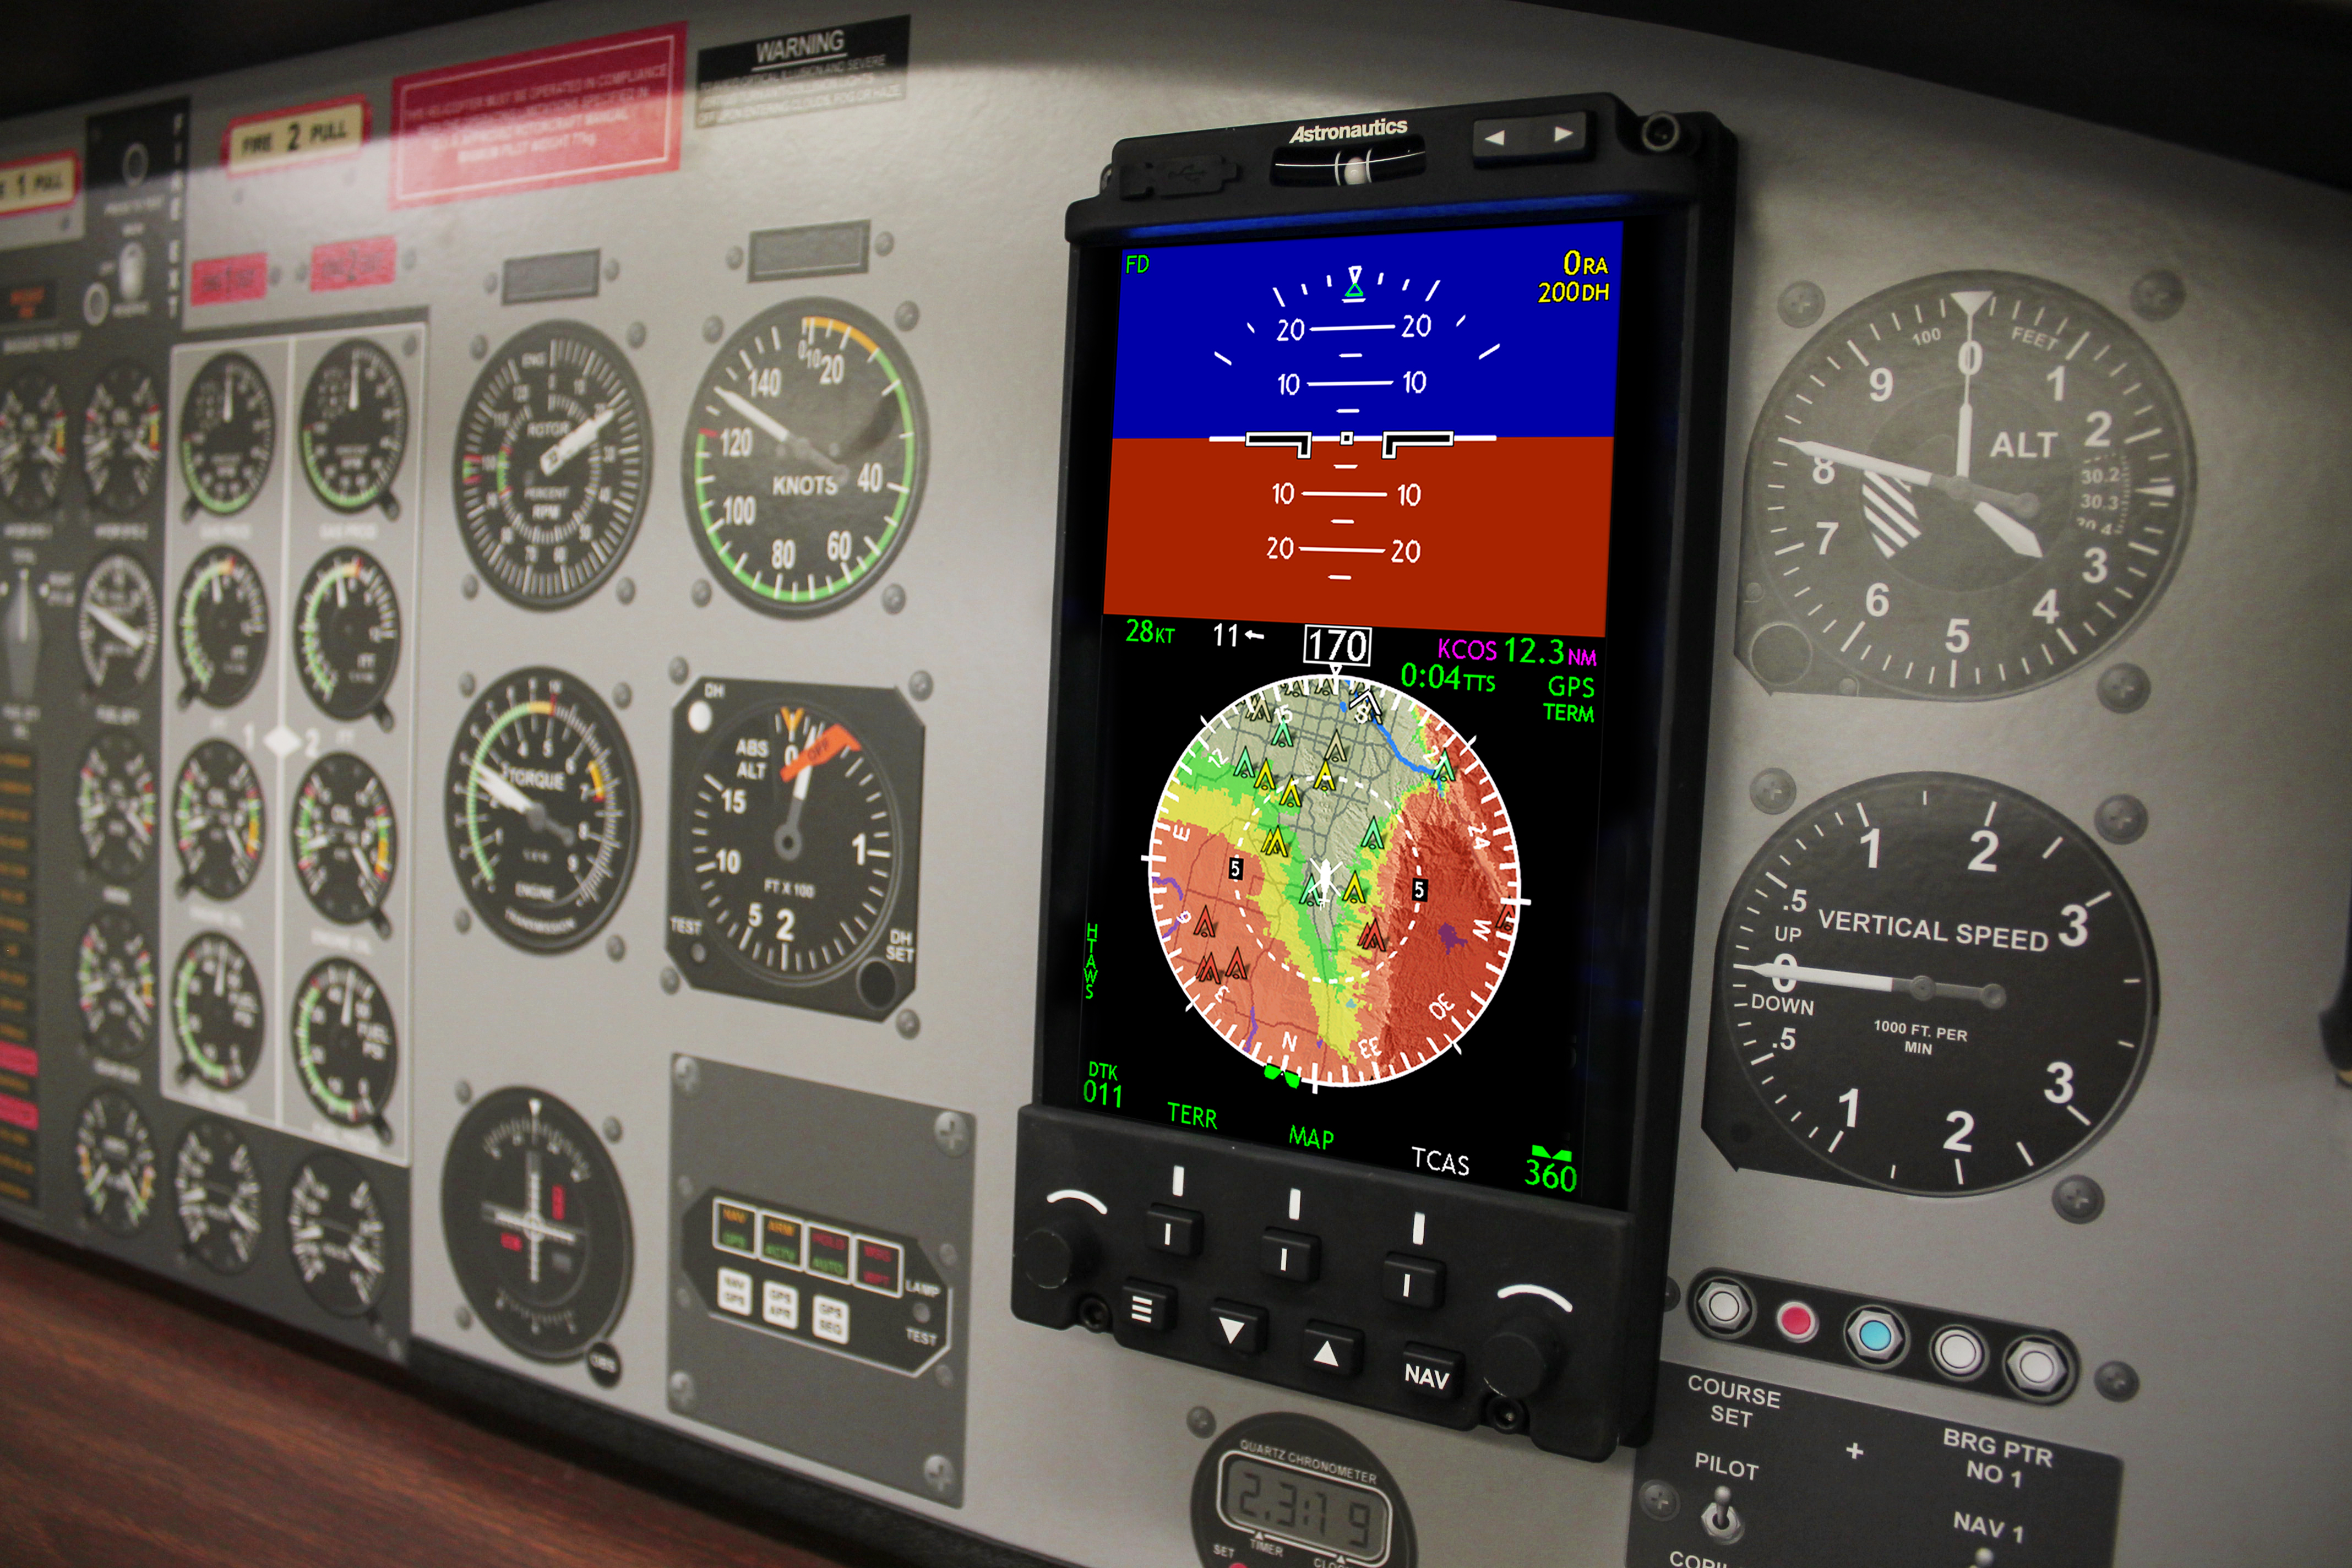 The Astronautics RoadRunner EFI — shown featured in a cockpit demonstration panel during HAI HELI-EXPO 2018. Astronautics Photo